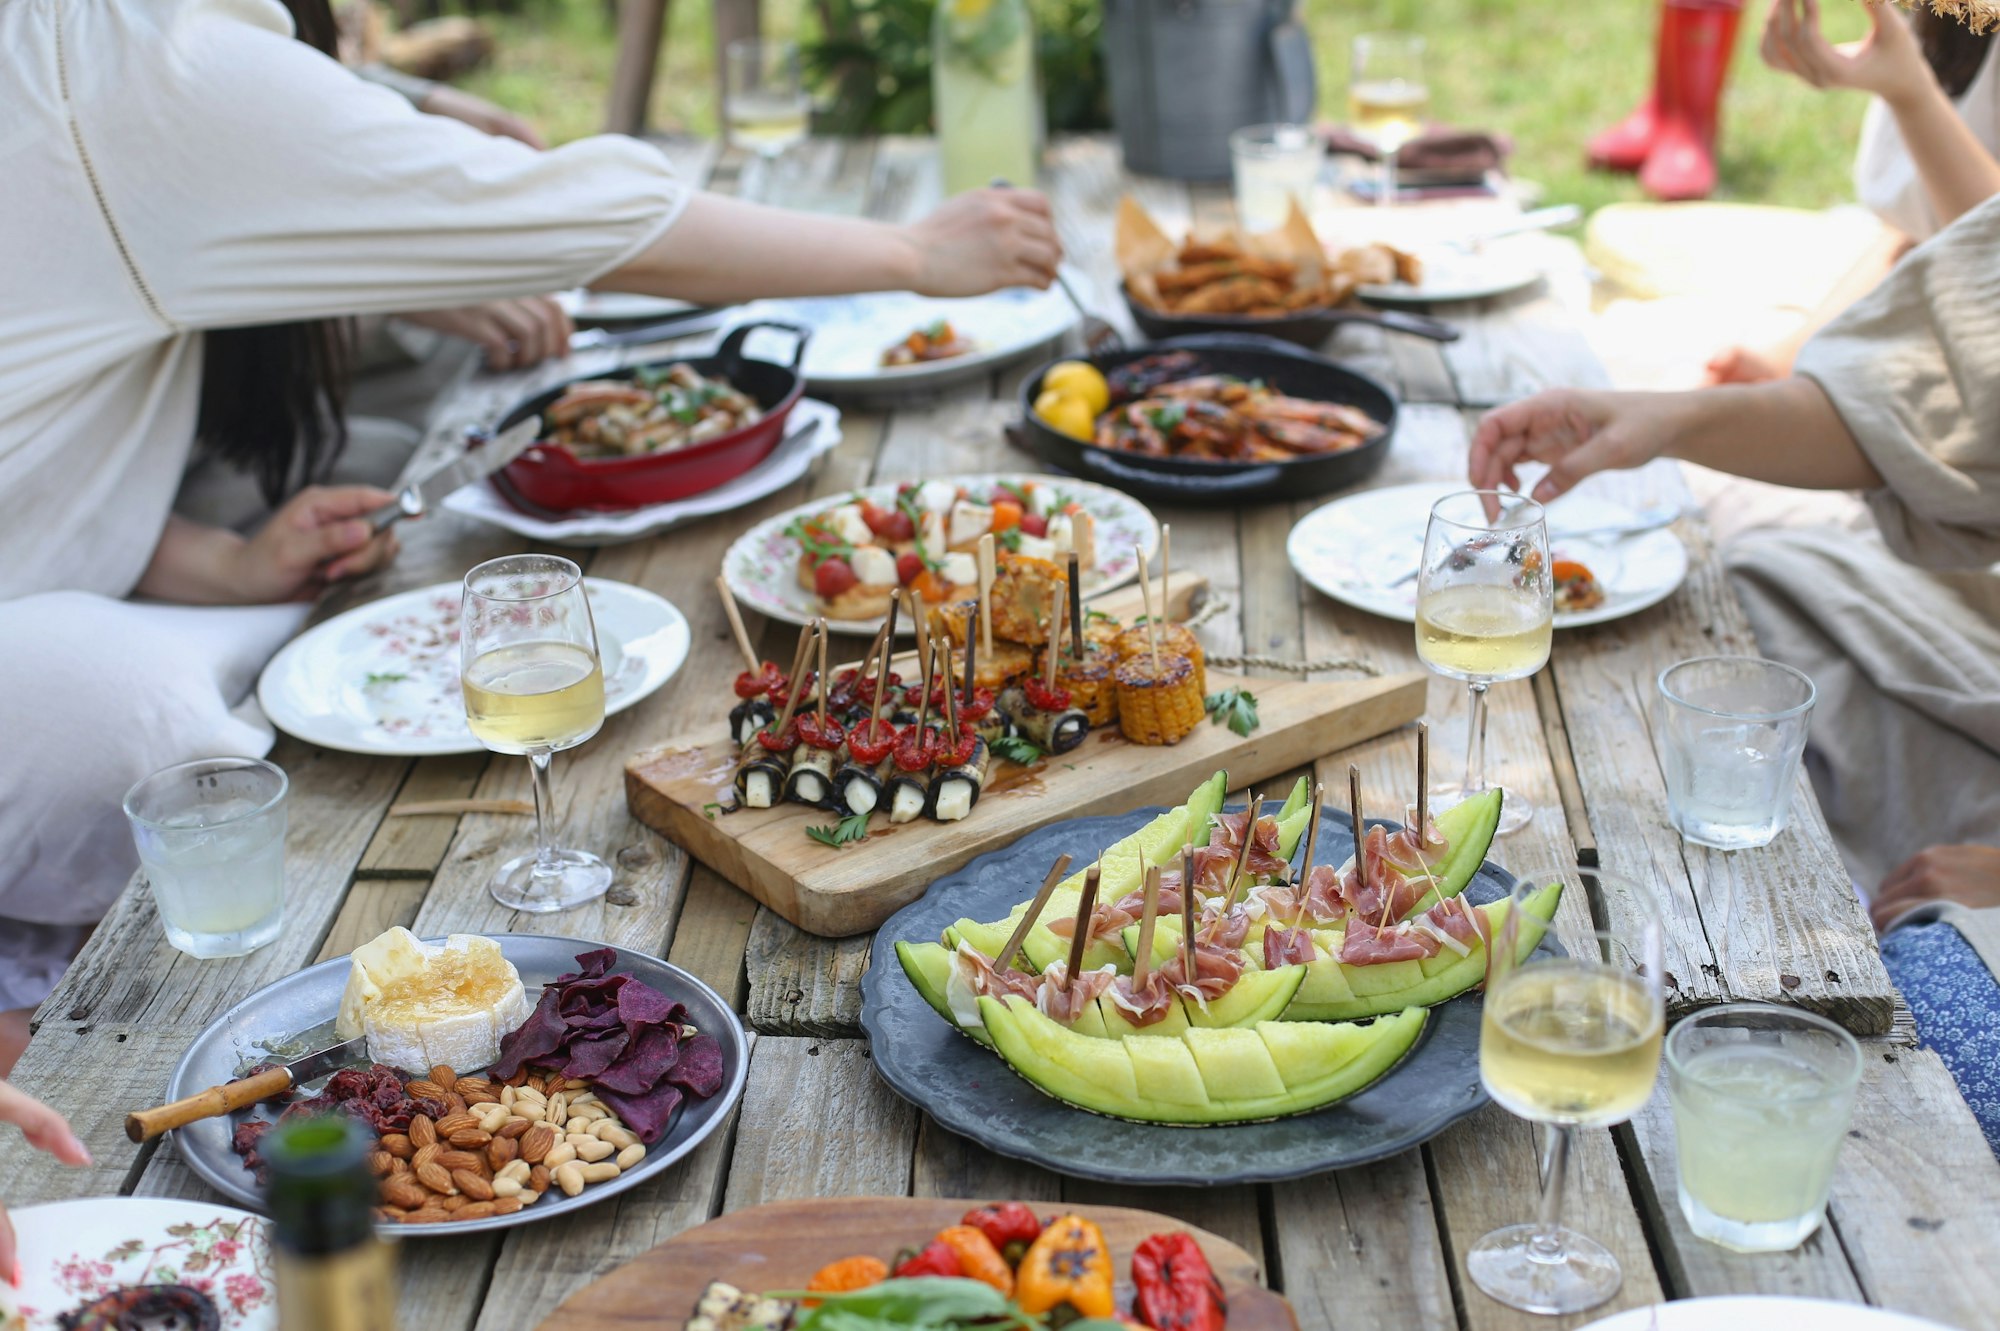 Healthy Eating Tips For Memorial Day Weekend